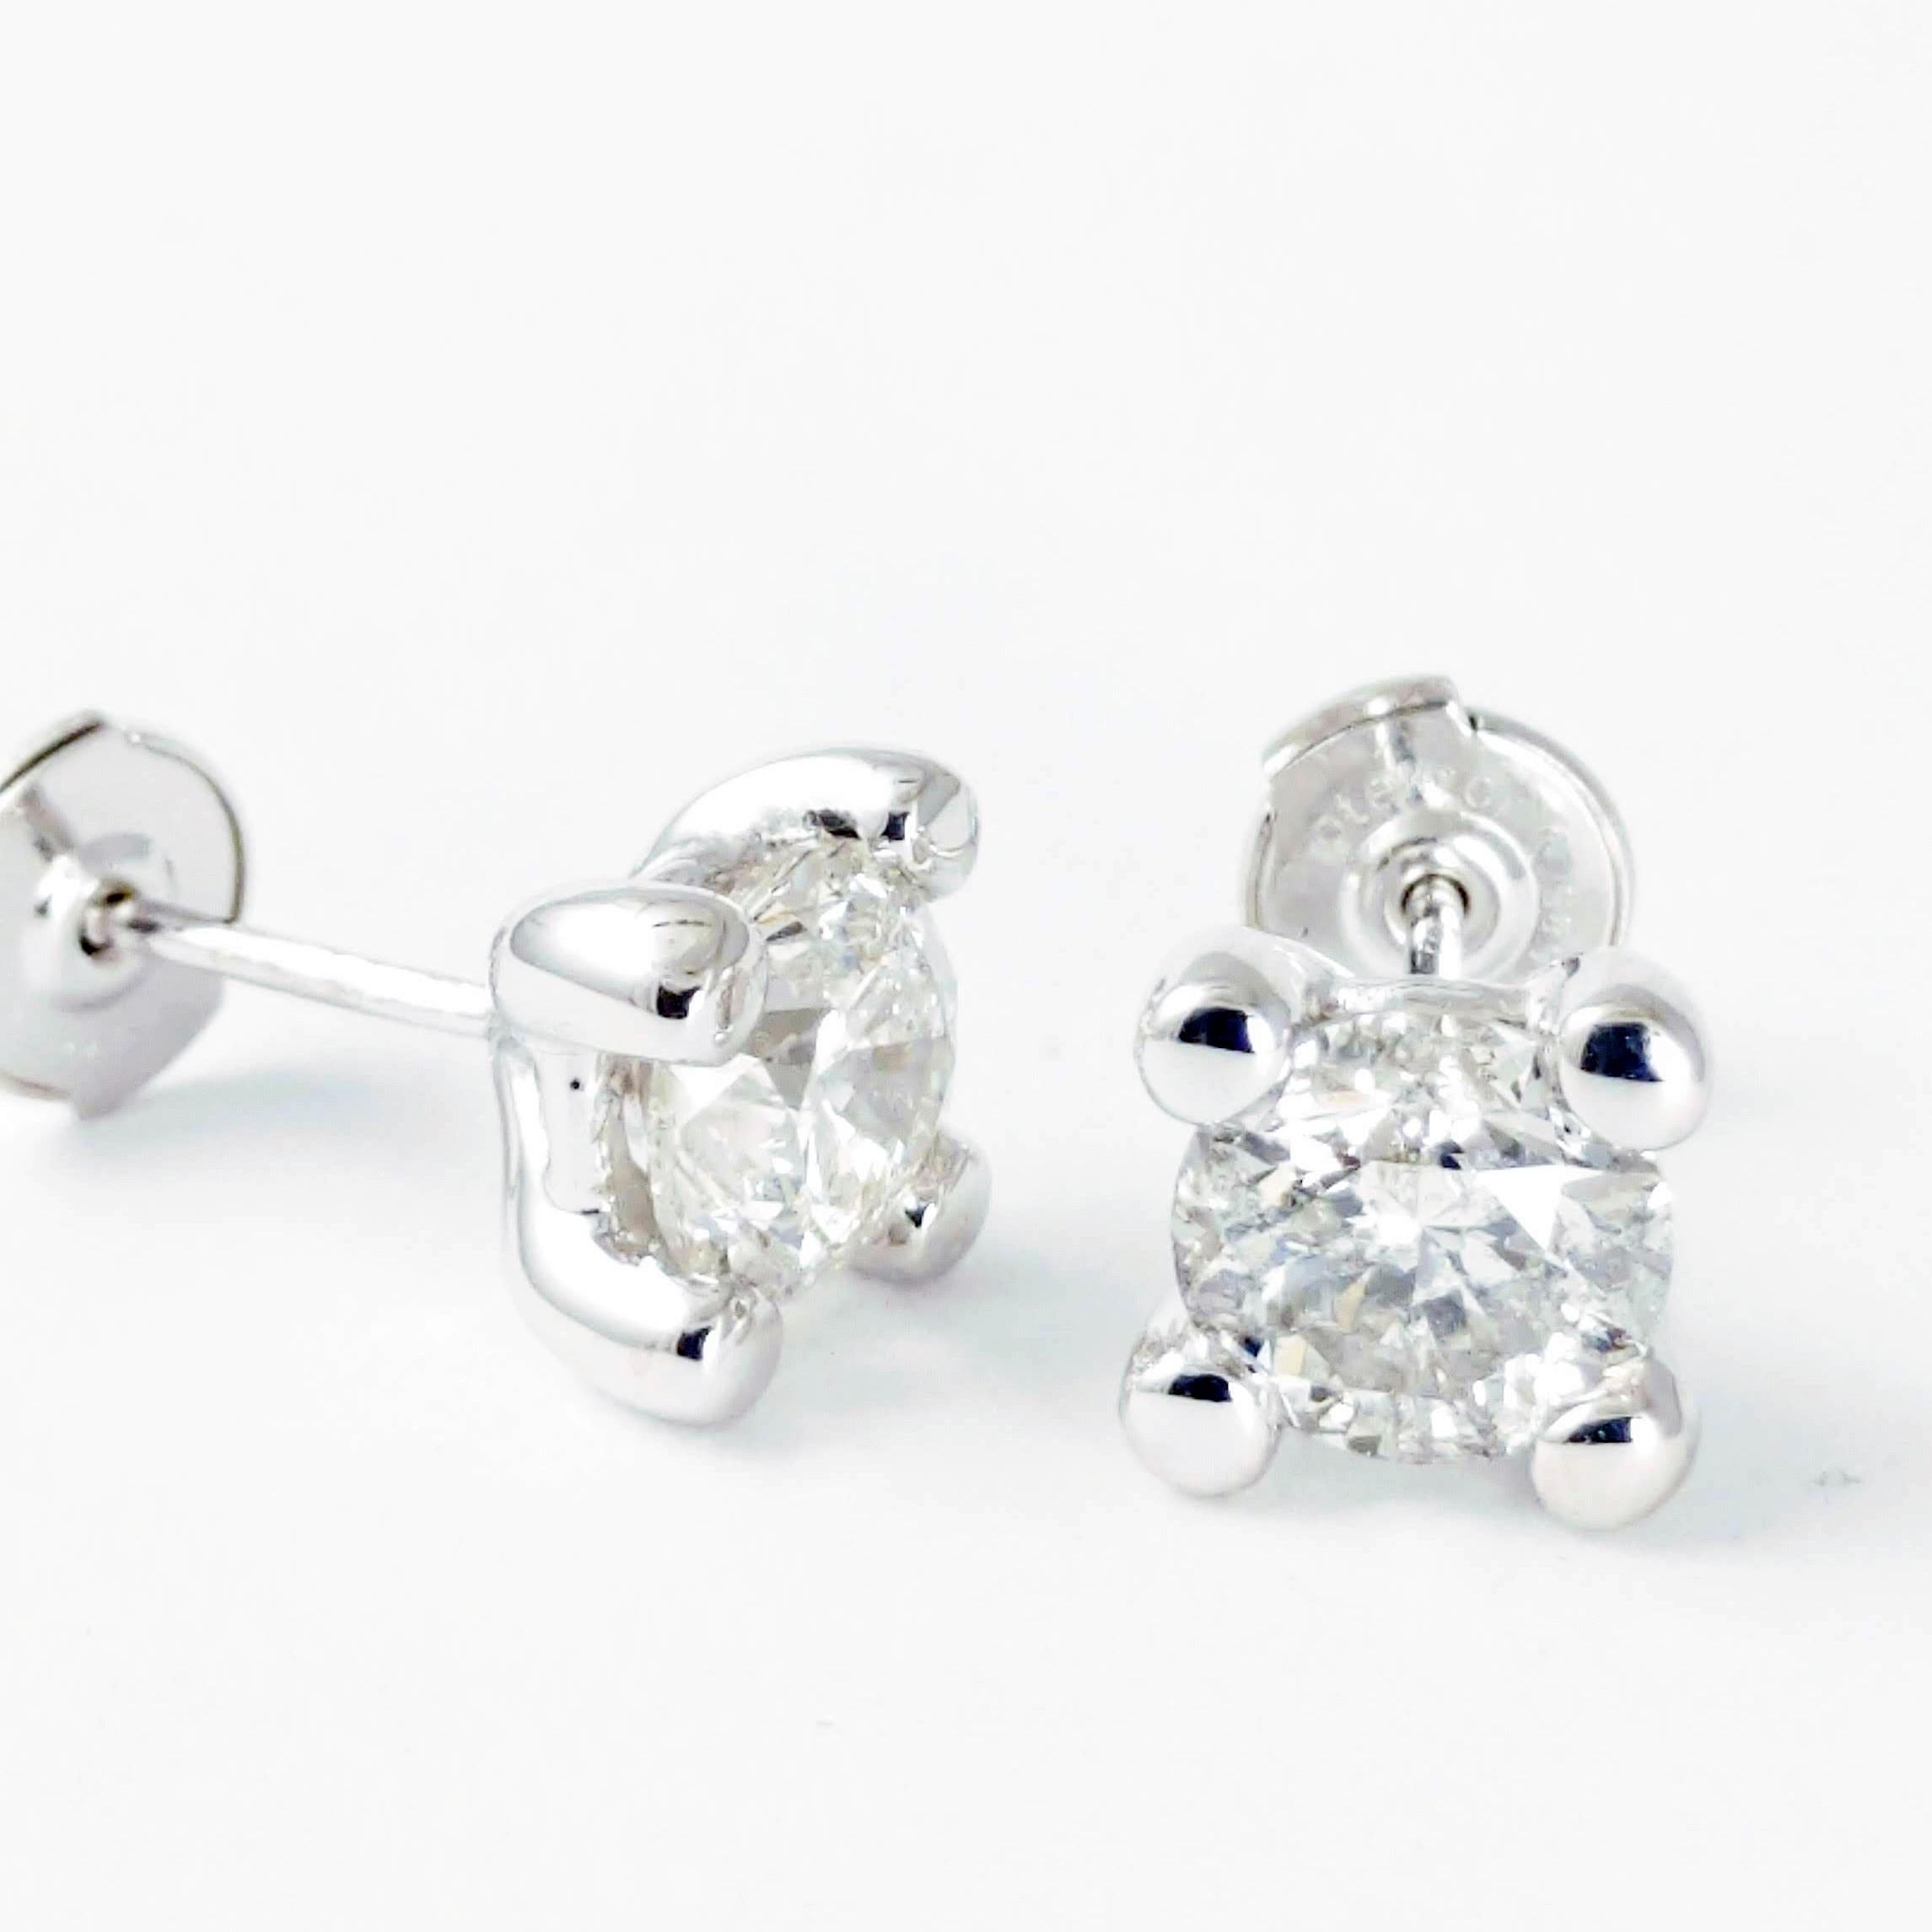 These earrings update a timeless and classic look. The casual stud earrings are set into a custom-made heavy four-prong style mounting made of 14k white gold. The studs feature two round GIA certified brilliant cut diamonds, 2.61 ctw., that are